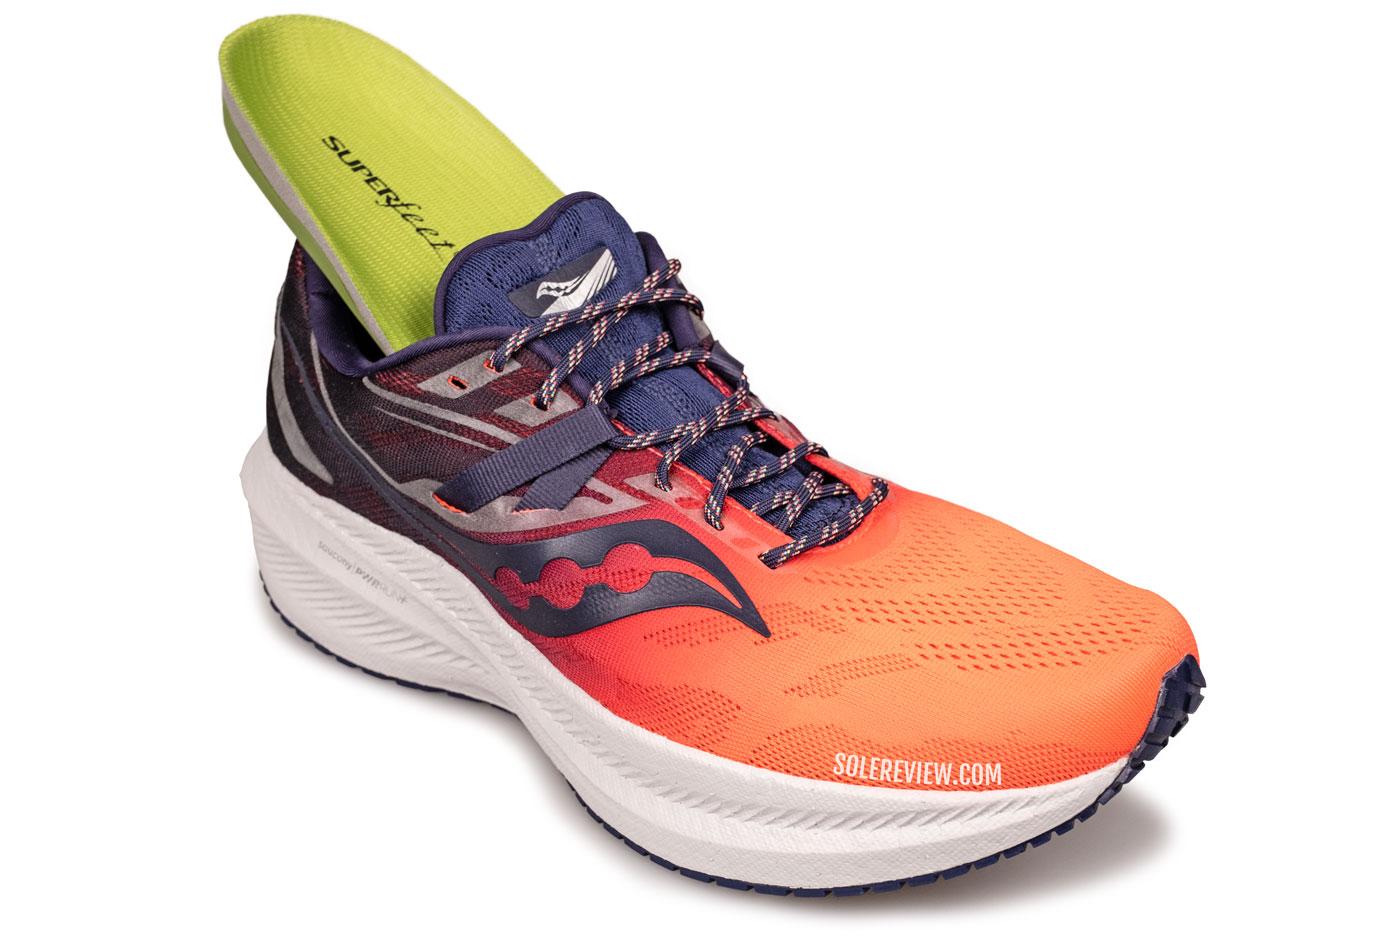 The Saucony Triumph 20 with Superfeet Green insole.